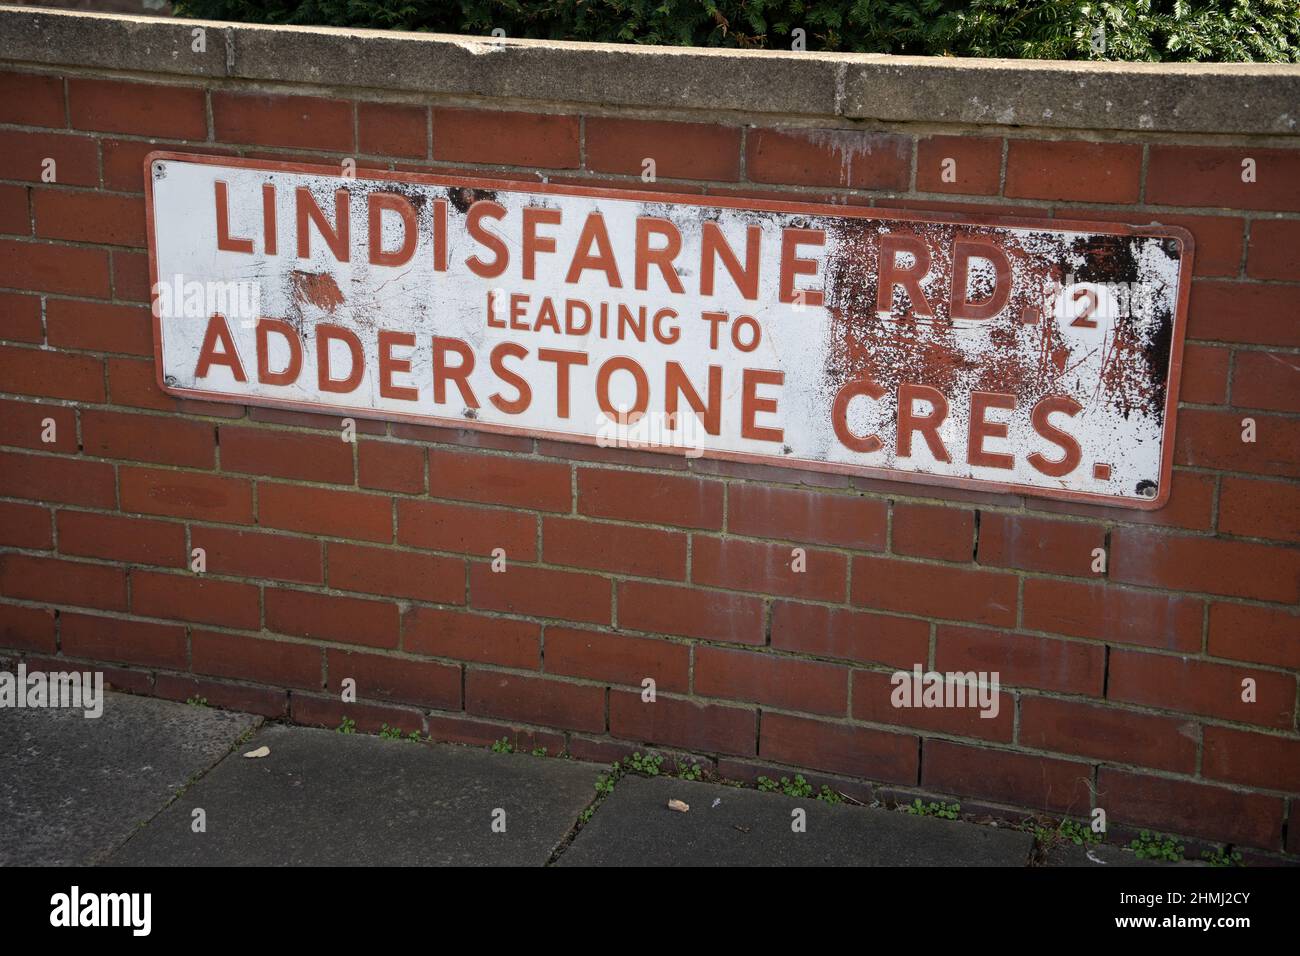 Lindisfarne Road leading to Adderstone Crescent street sign, Jesmond, Newcastle upon Tyne, UK. A desirable area. Stock Photo